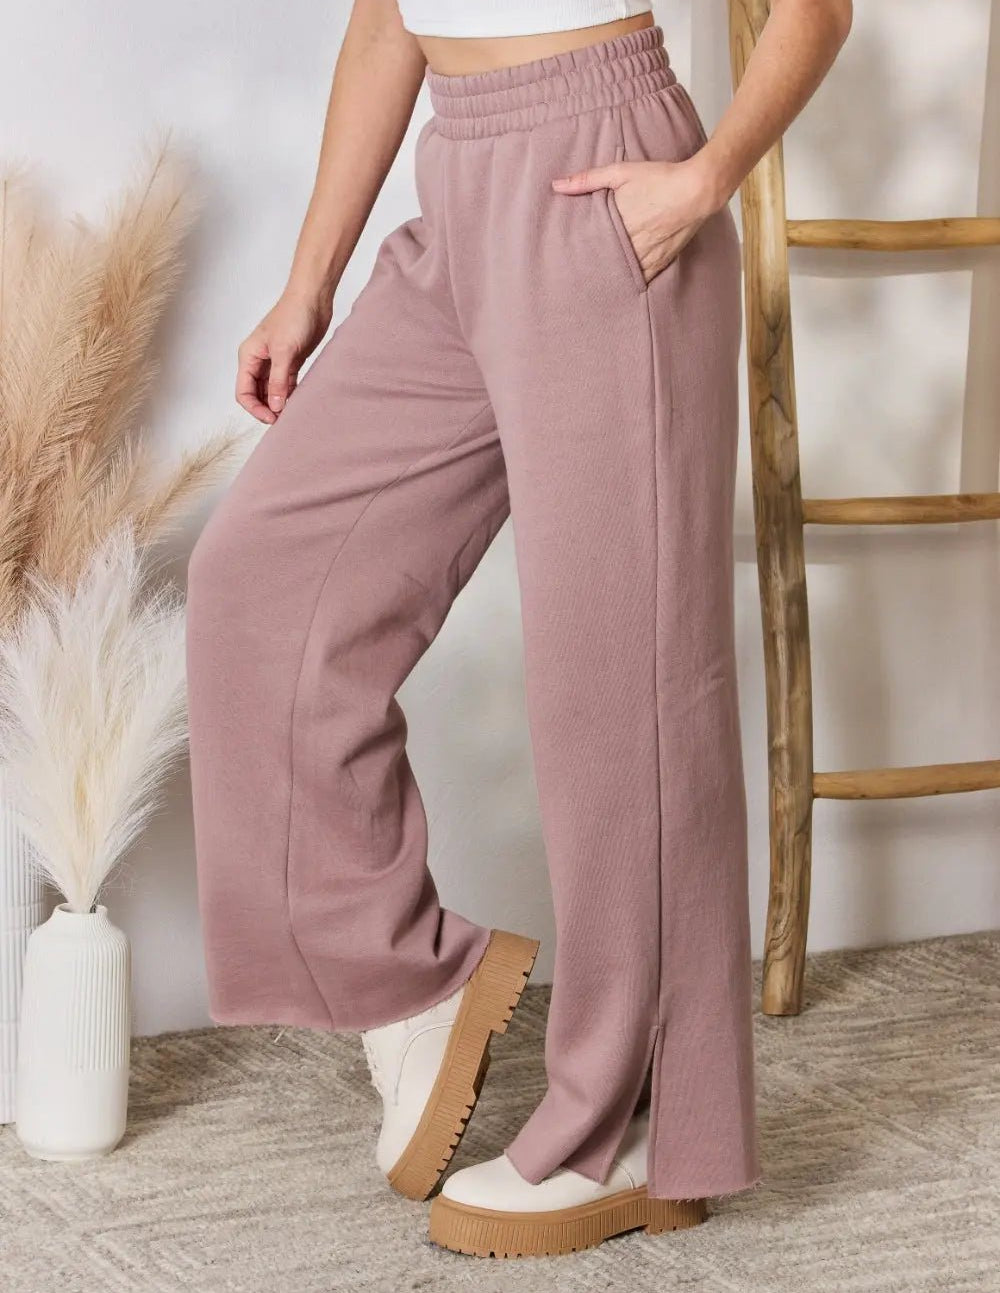 CASUAL RELAXED FIT COMFORTABLE PANTS FOR LOUNGING - MeadeuxCASUAL RELAXED FIT COMFORTABLE PANTS FOR LOUNGINGBottomsMeadeux